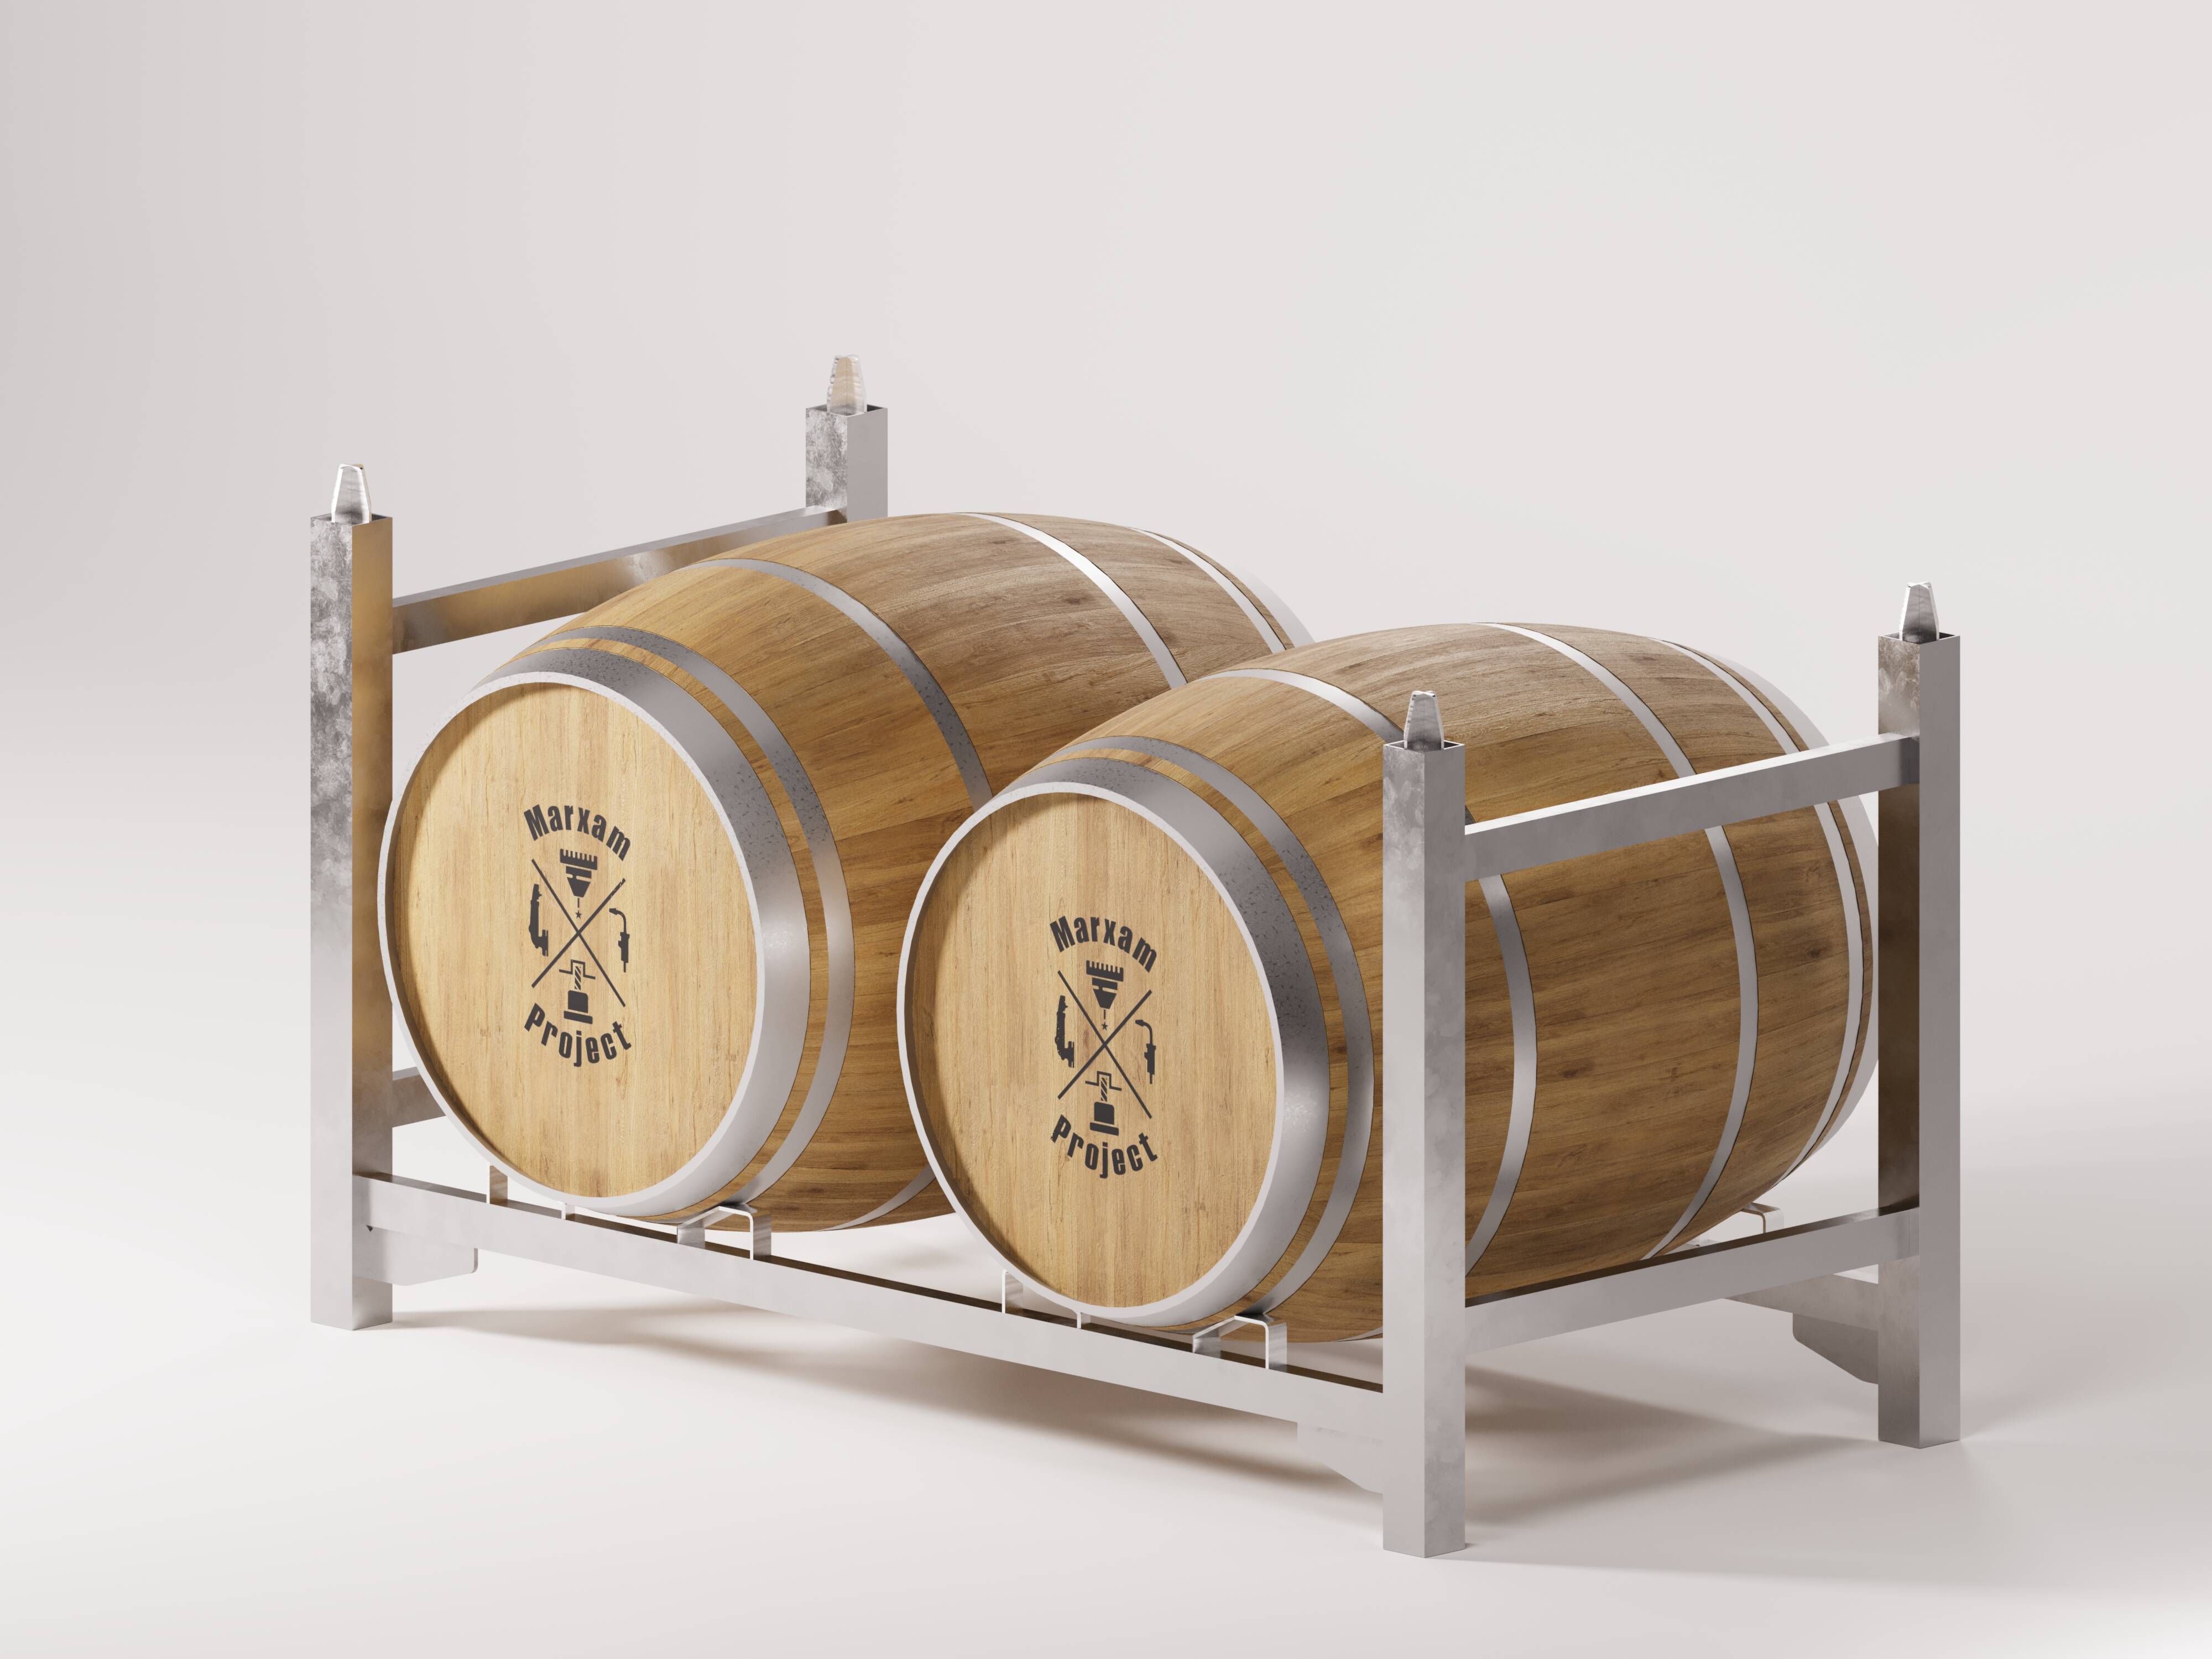 The image depicts a sturdy metal barrel cage supporting two well-maintained wooden barrels. The barrels are securely held within a barrel cage, showcasing their pristine condition.